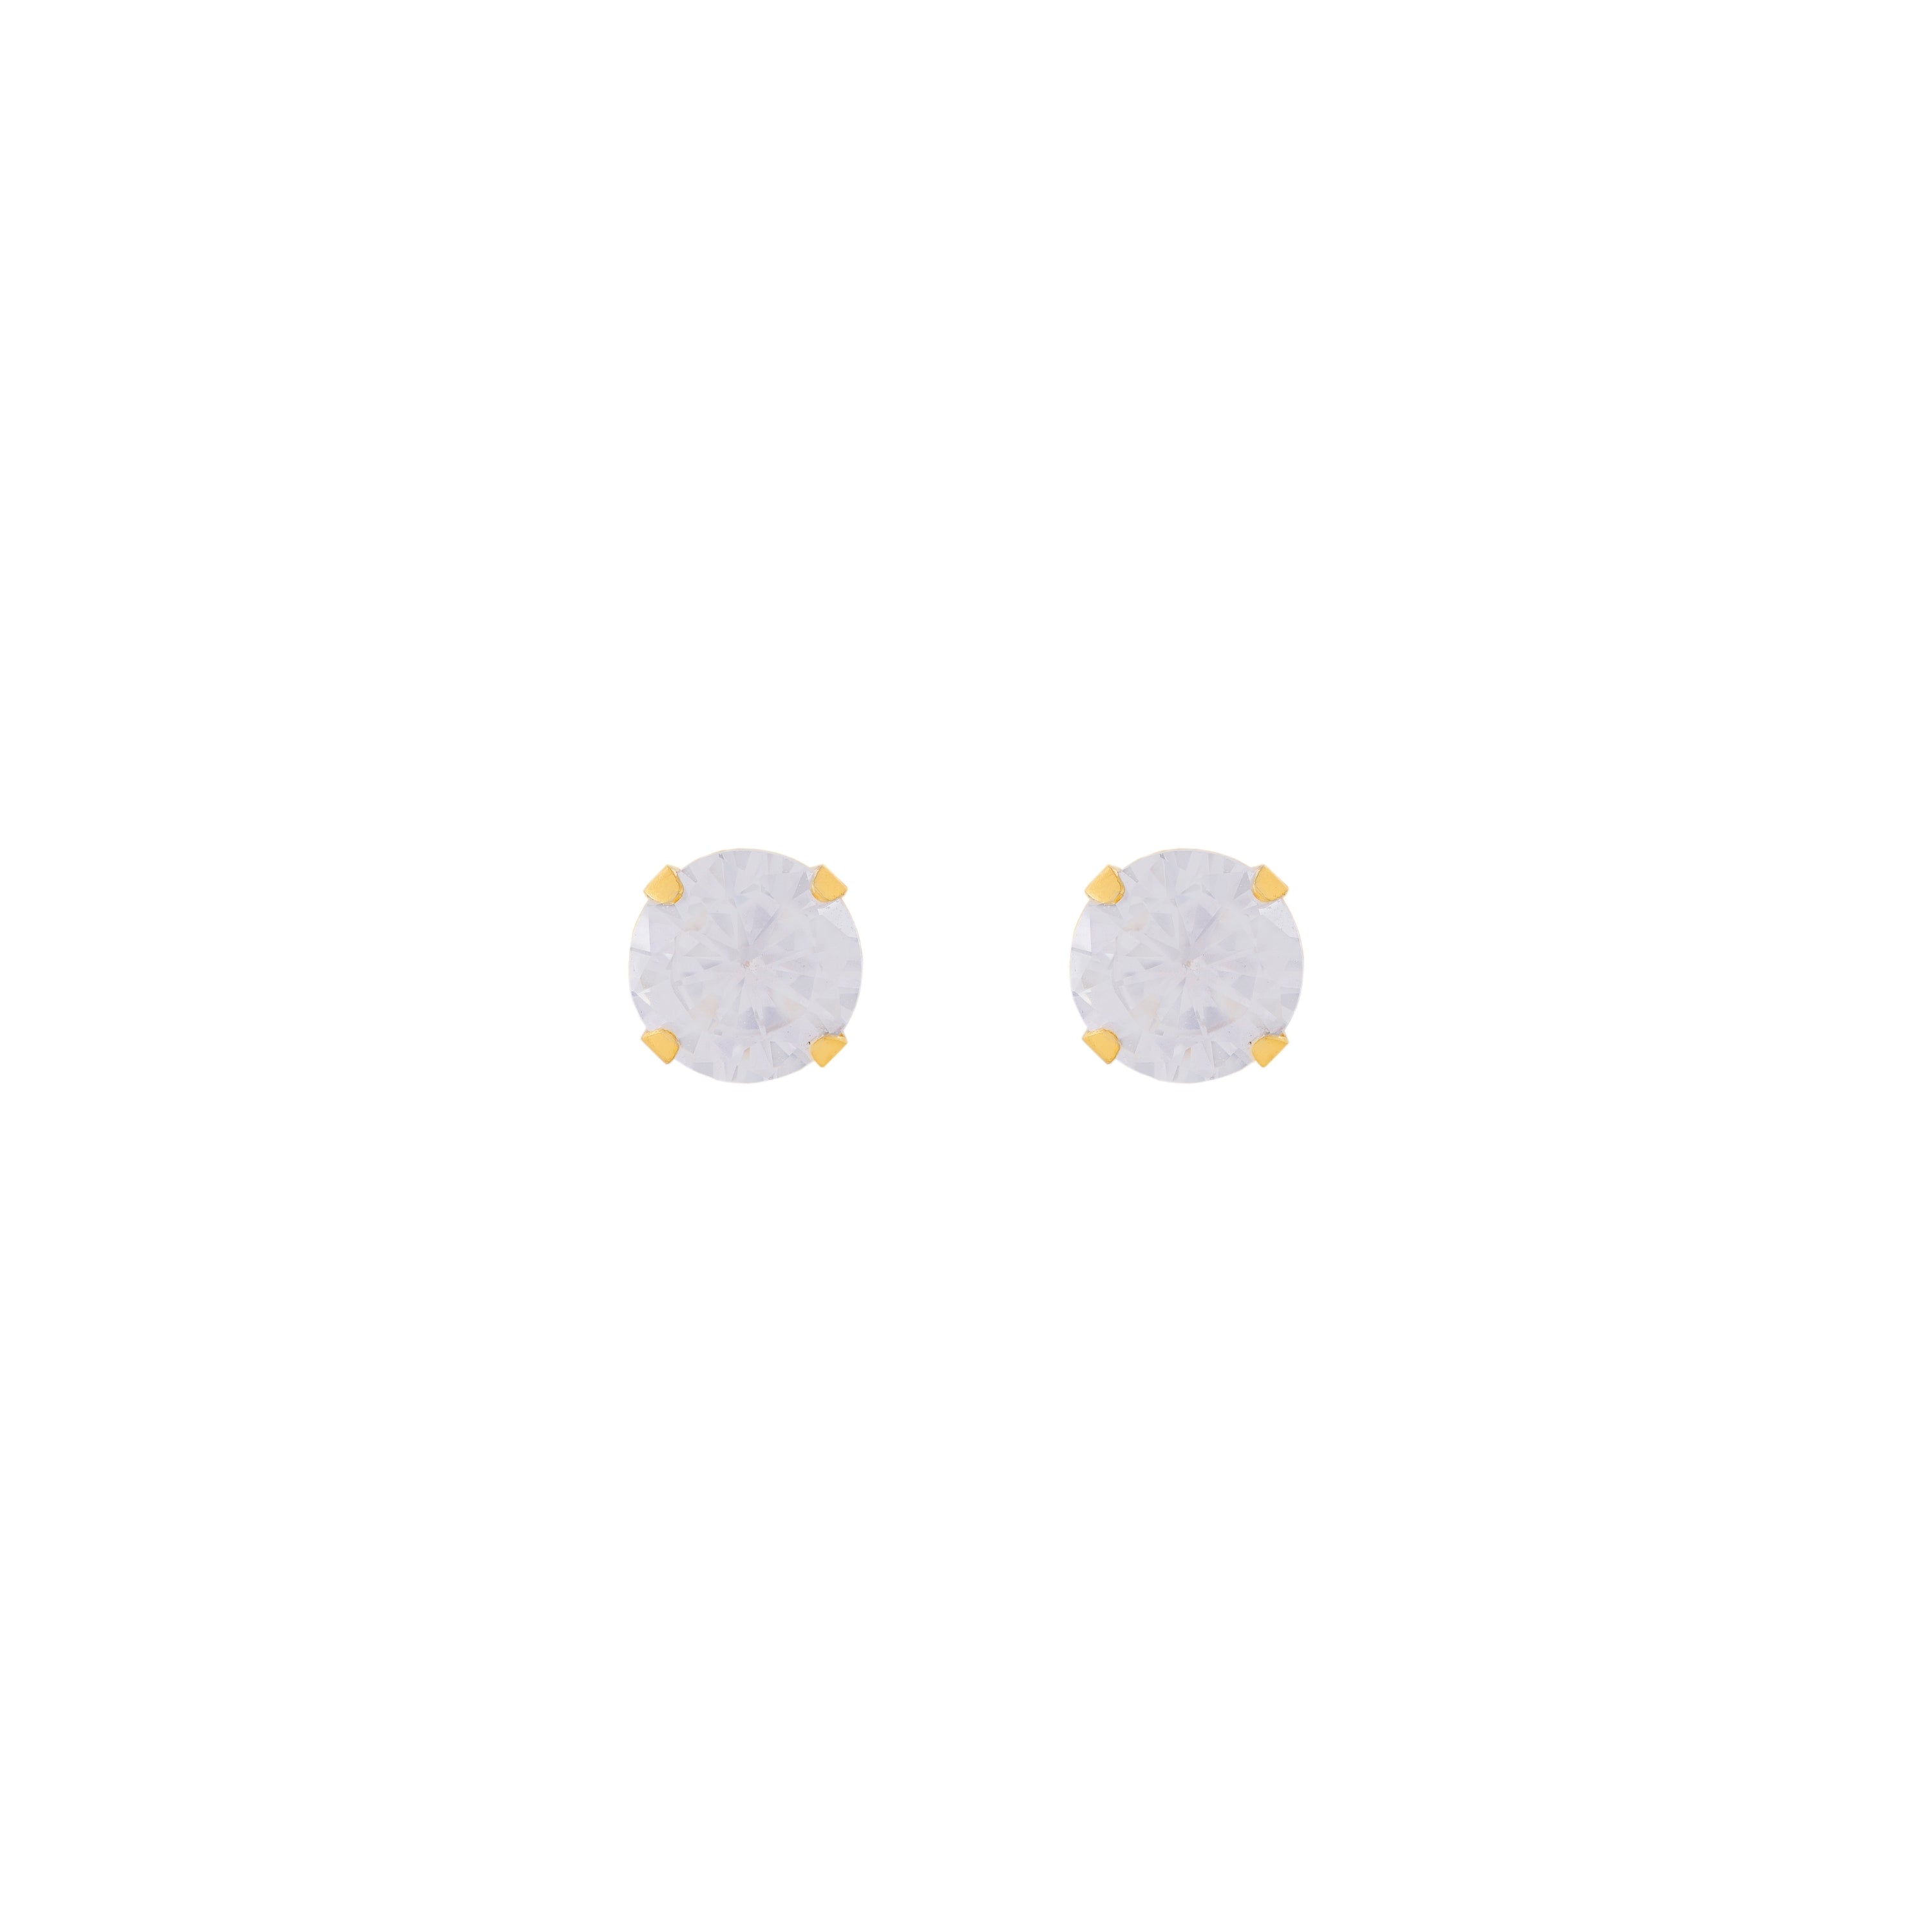 5MM Cubic Zirconia 24K Pure Gold Plated Ear Studs | MADE IN USA | Ideal for everyday wear